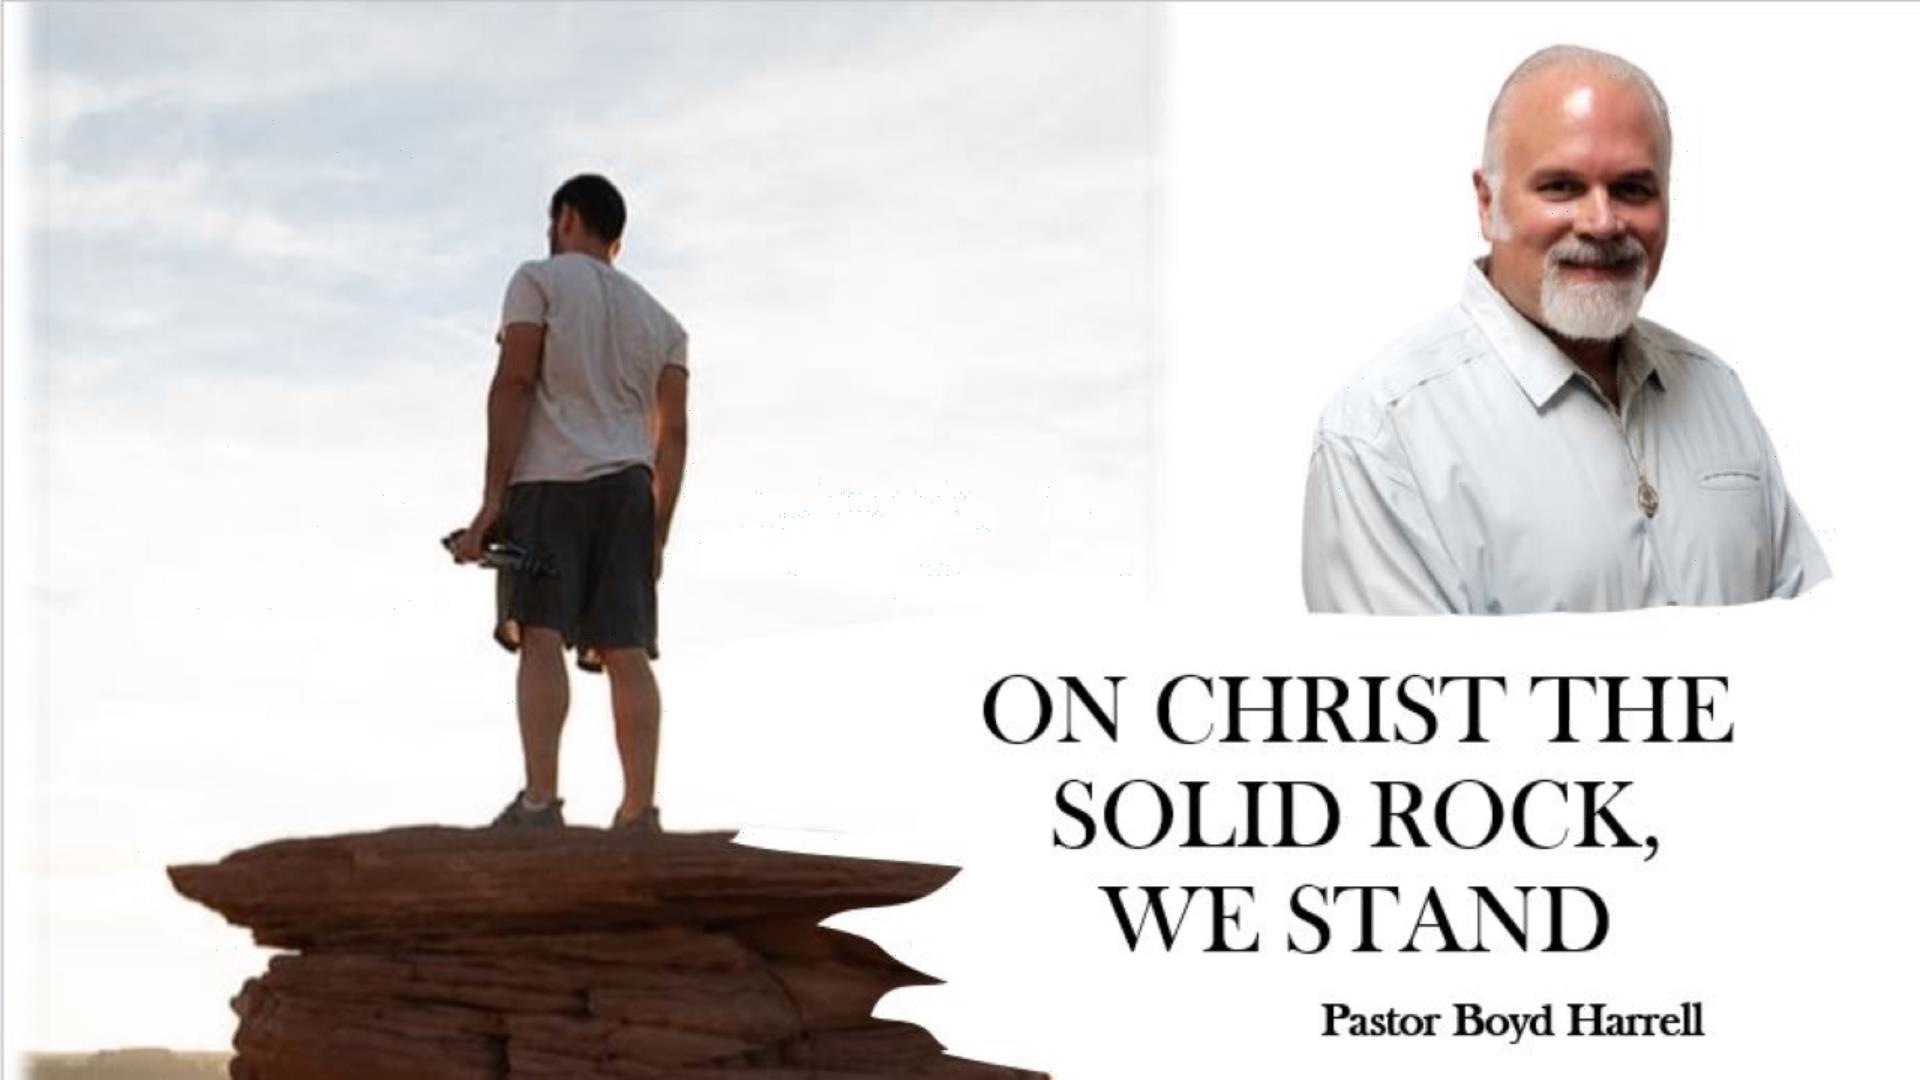 On Christ the Solid Rock We Stand